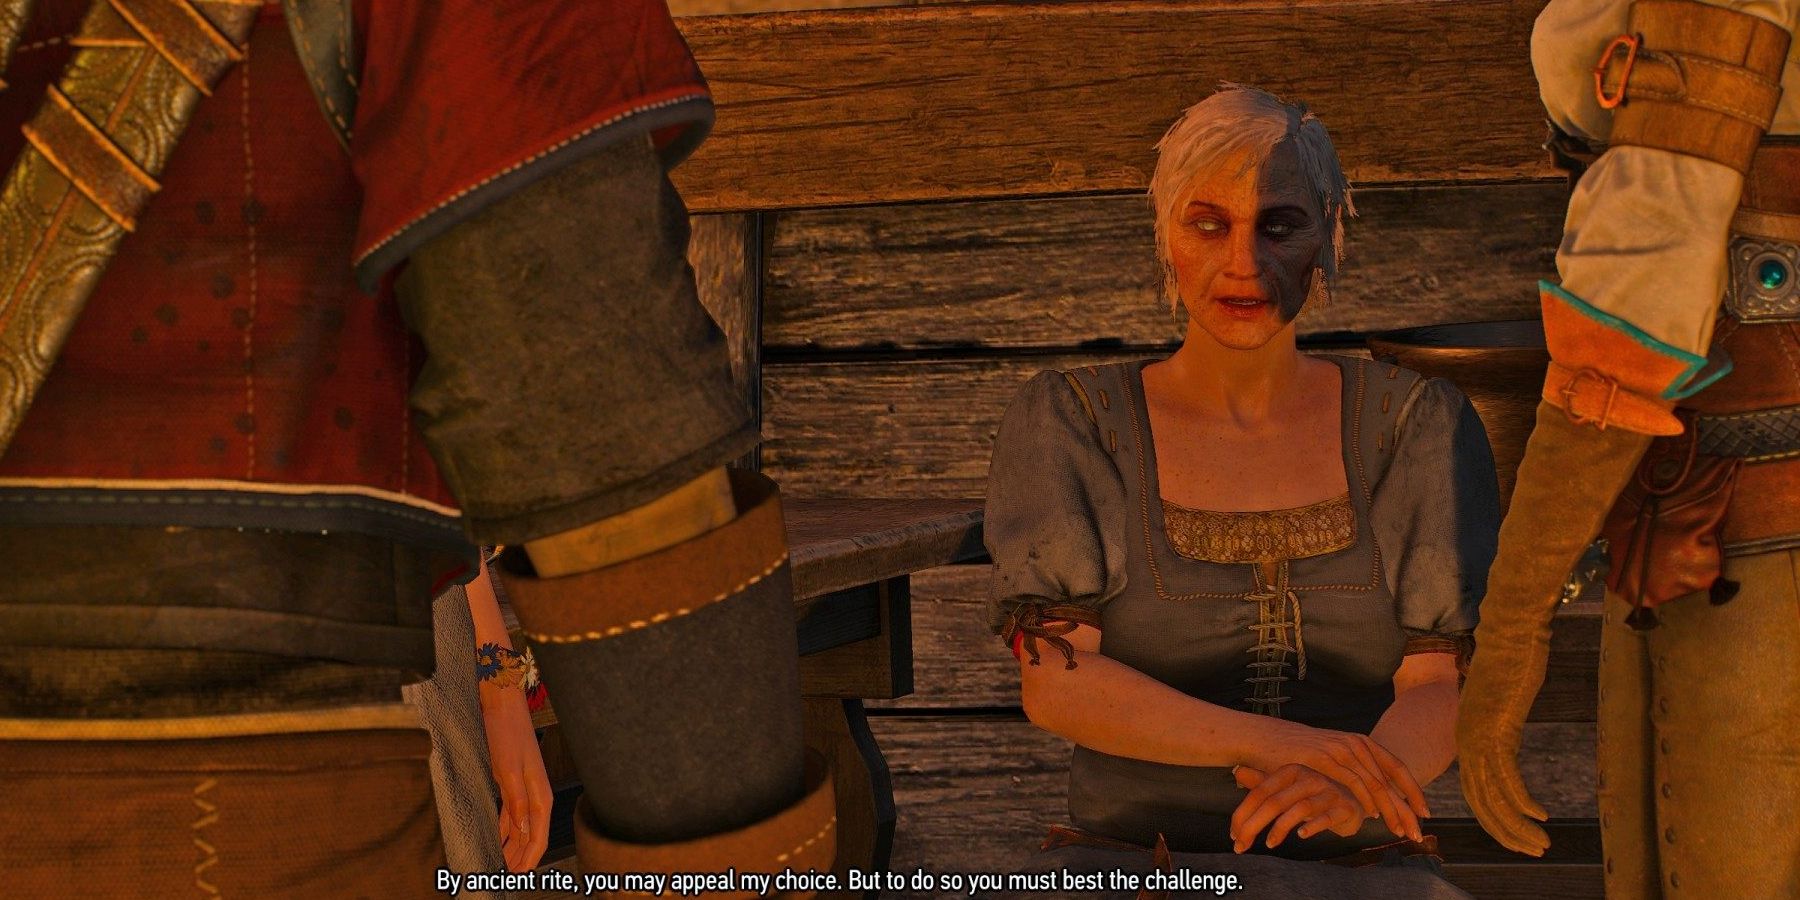 The Witcher 3 Thecla meets Geralt and Ciri